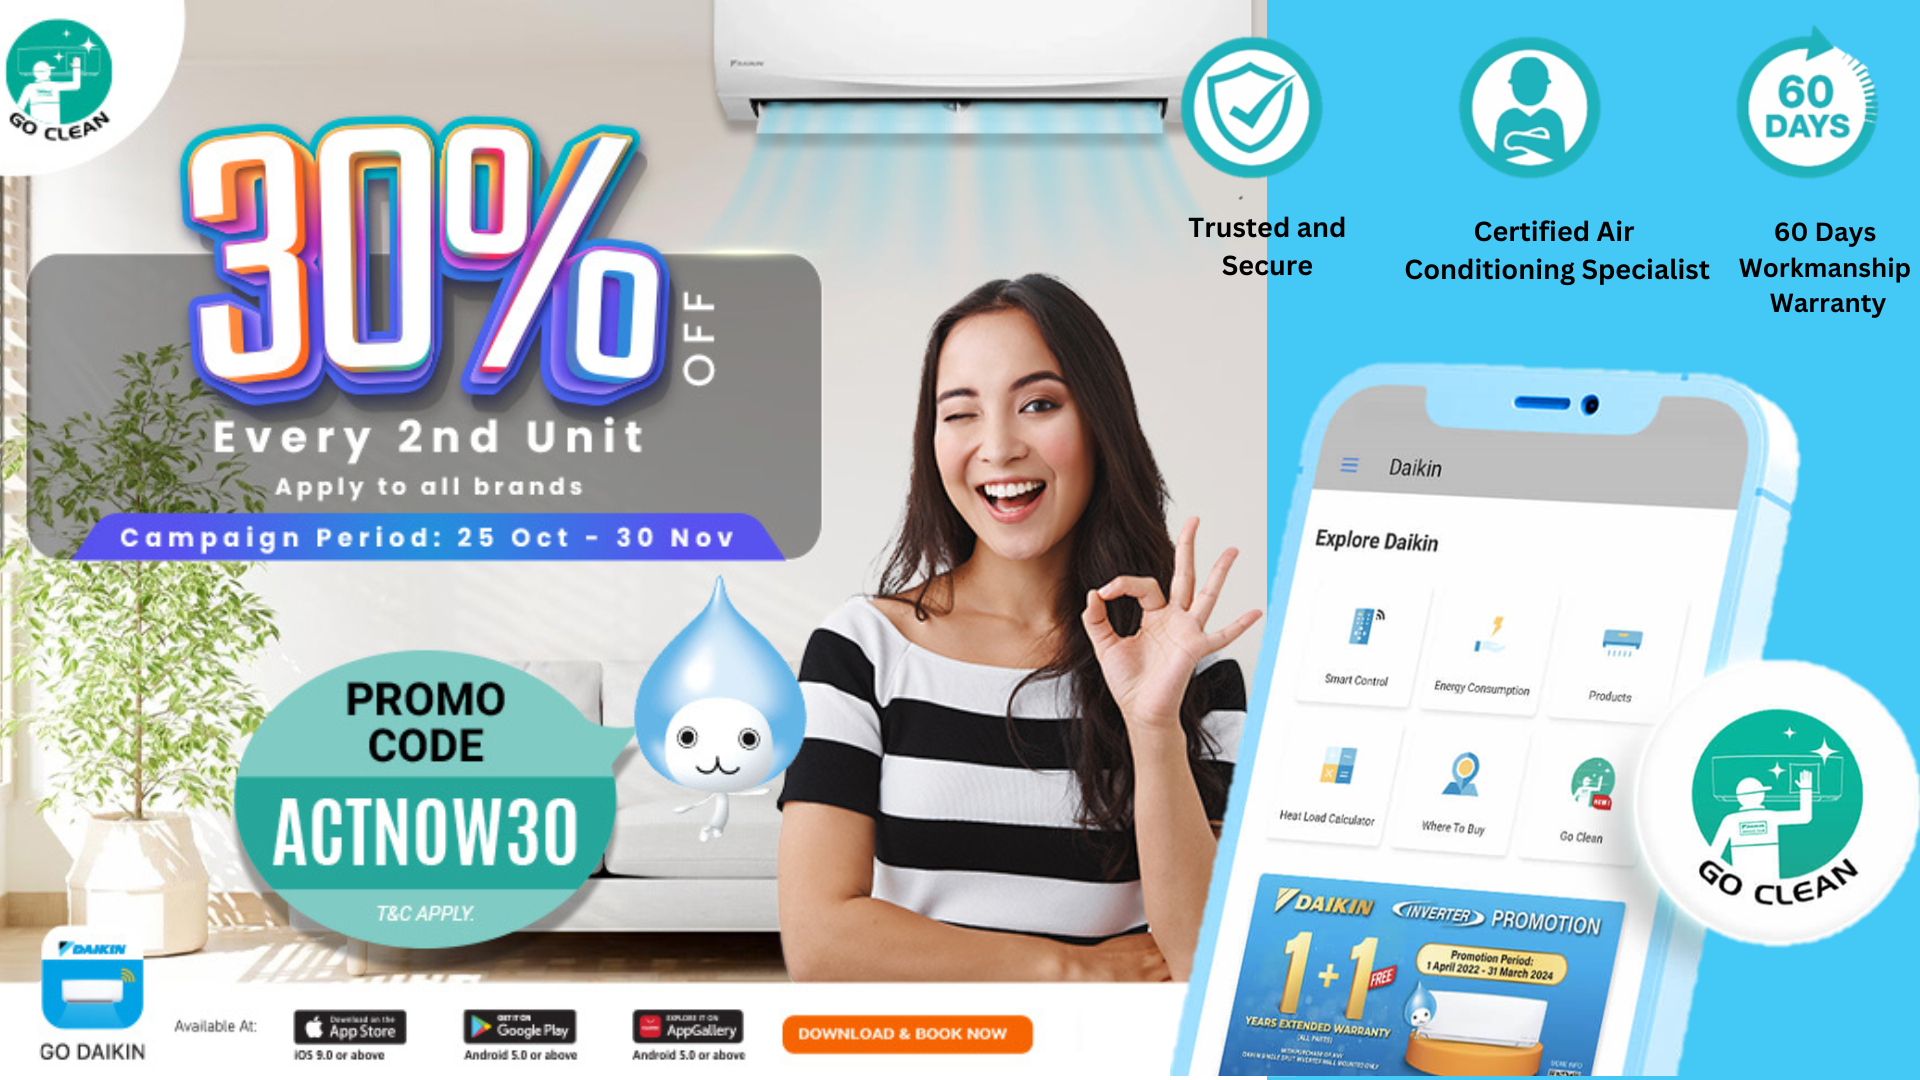 ACTNOW30 Get 30% Off 2nd Unit For Every 2 Units | Daikin Malaysia